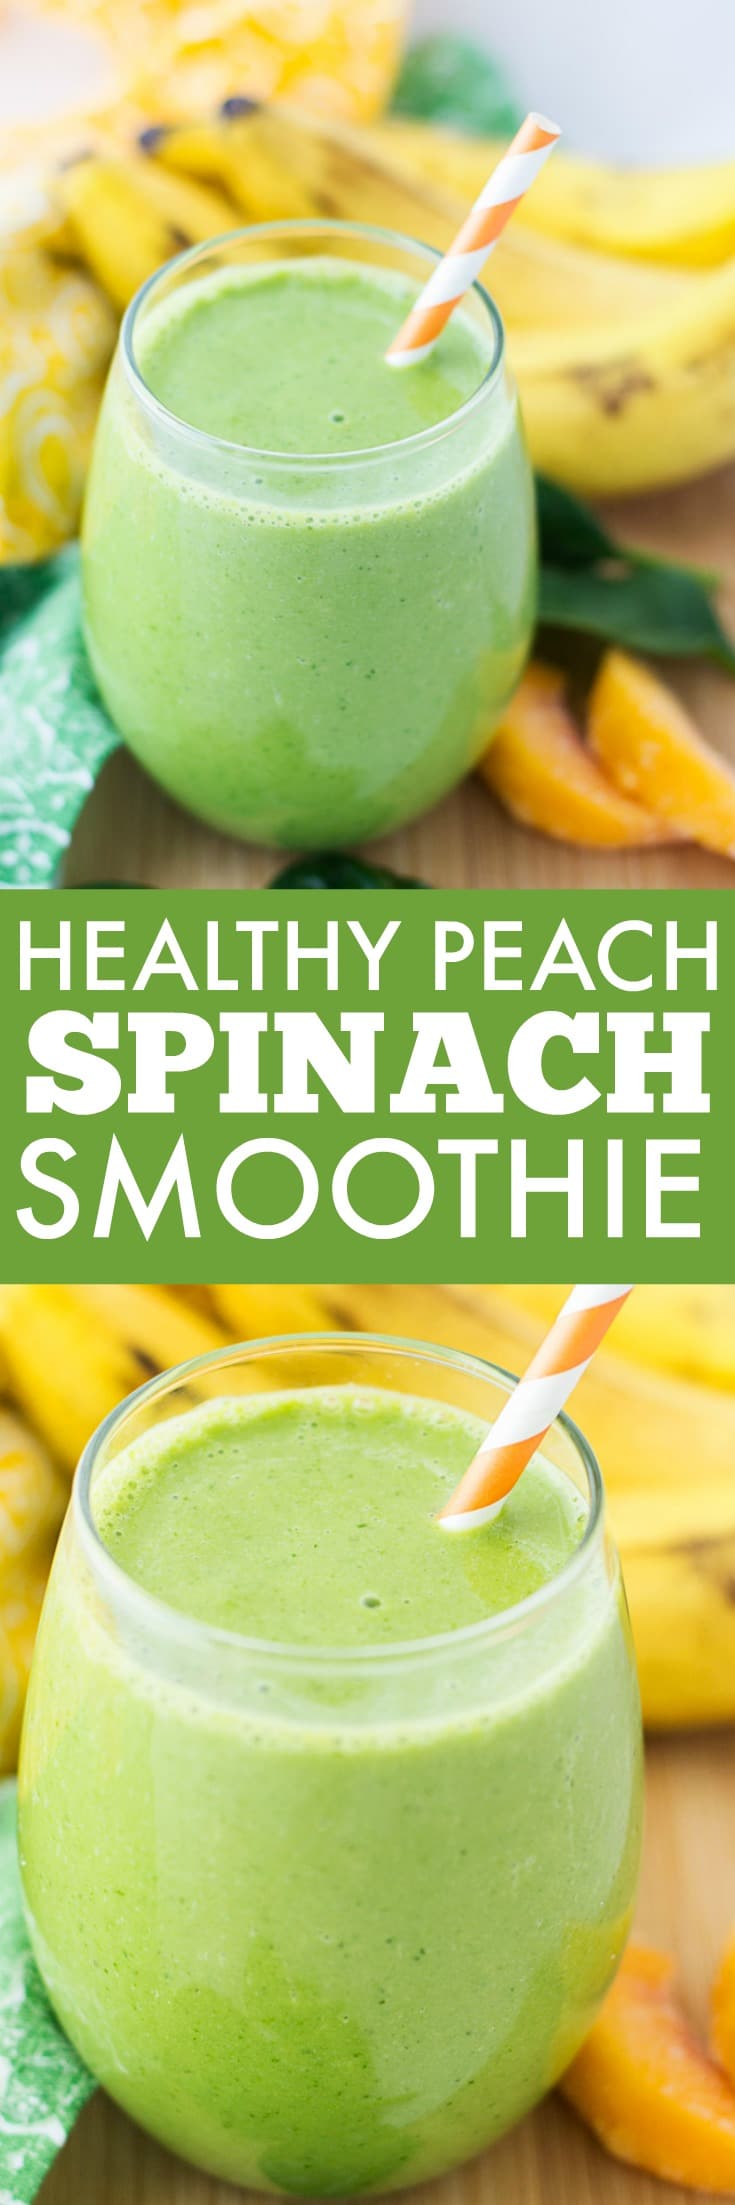 This green, healthy, delicious Peach Spinach Smoothie is going to be your new favorite drink. You get all the sweetness of the peaches and banana along with the nutrients from the spinach (without that spinach taste). It's so good!